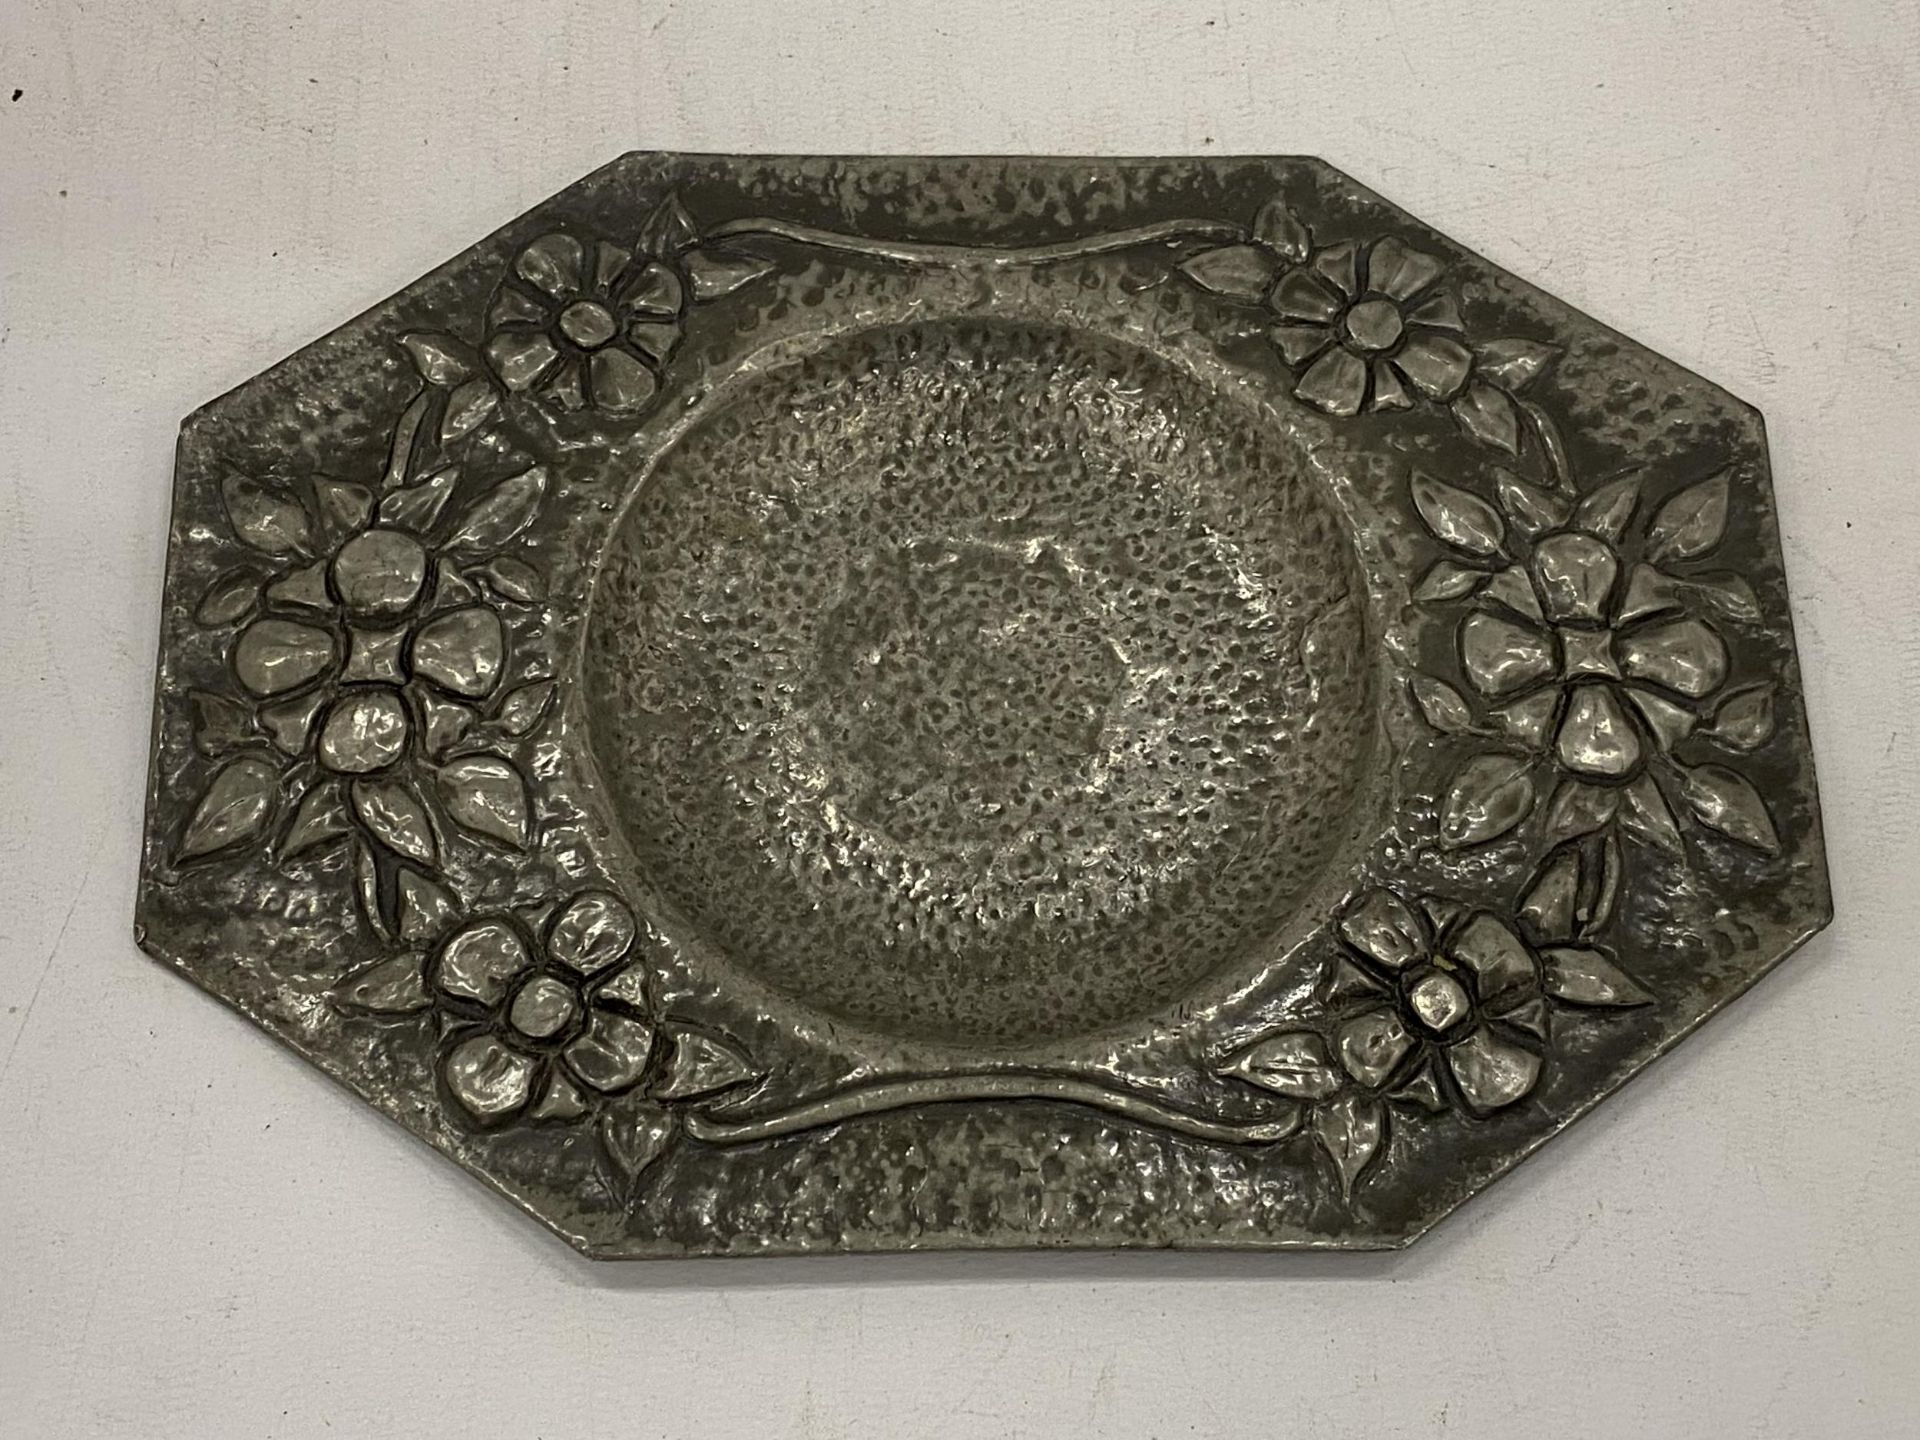 AN ARTS AND CRAFTS STYLE PEWTER DISH